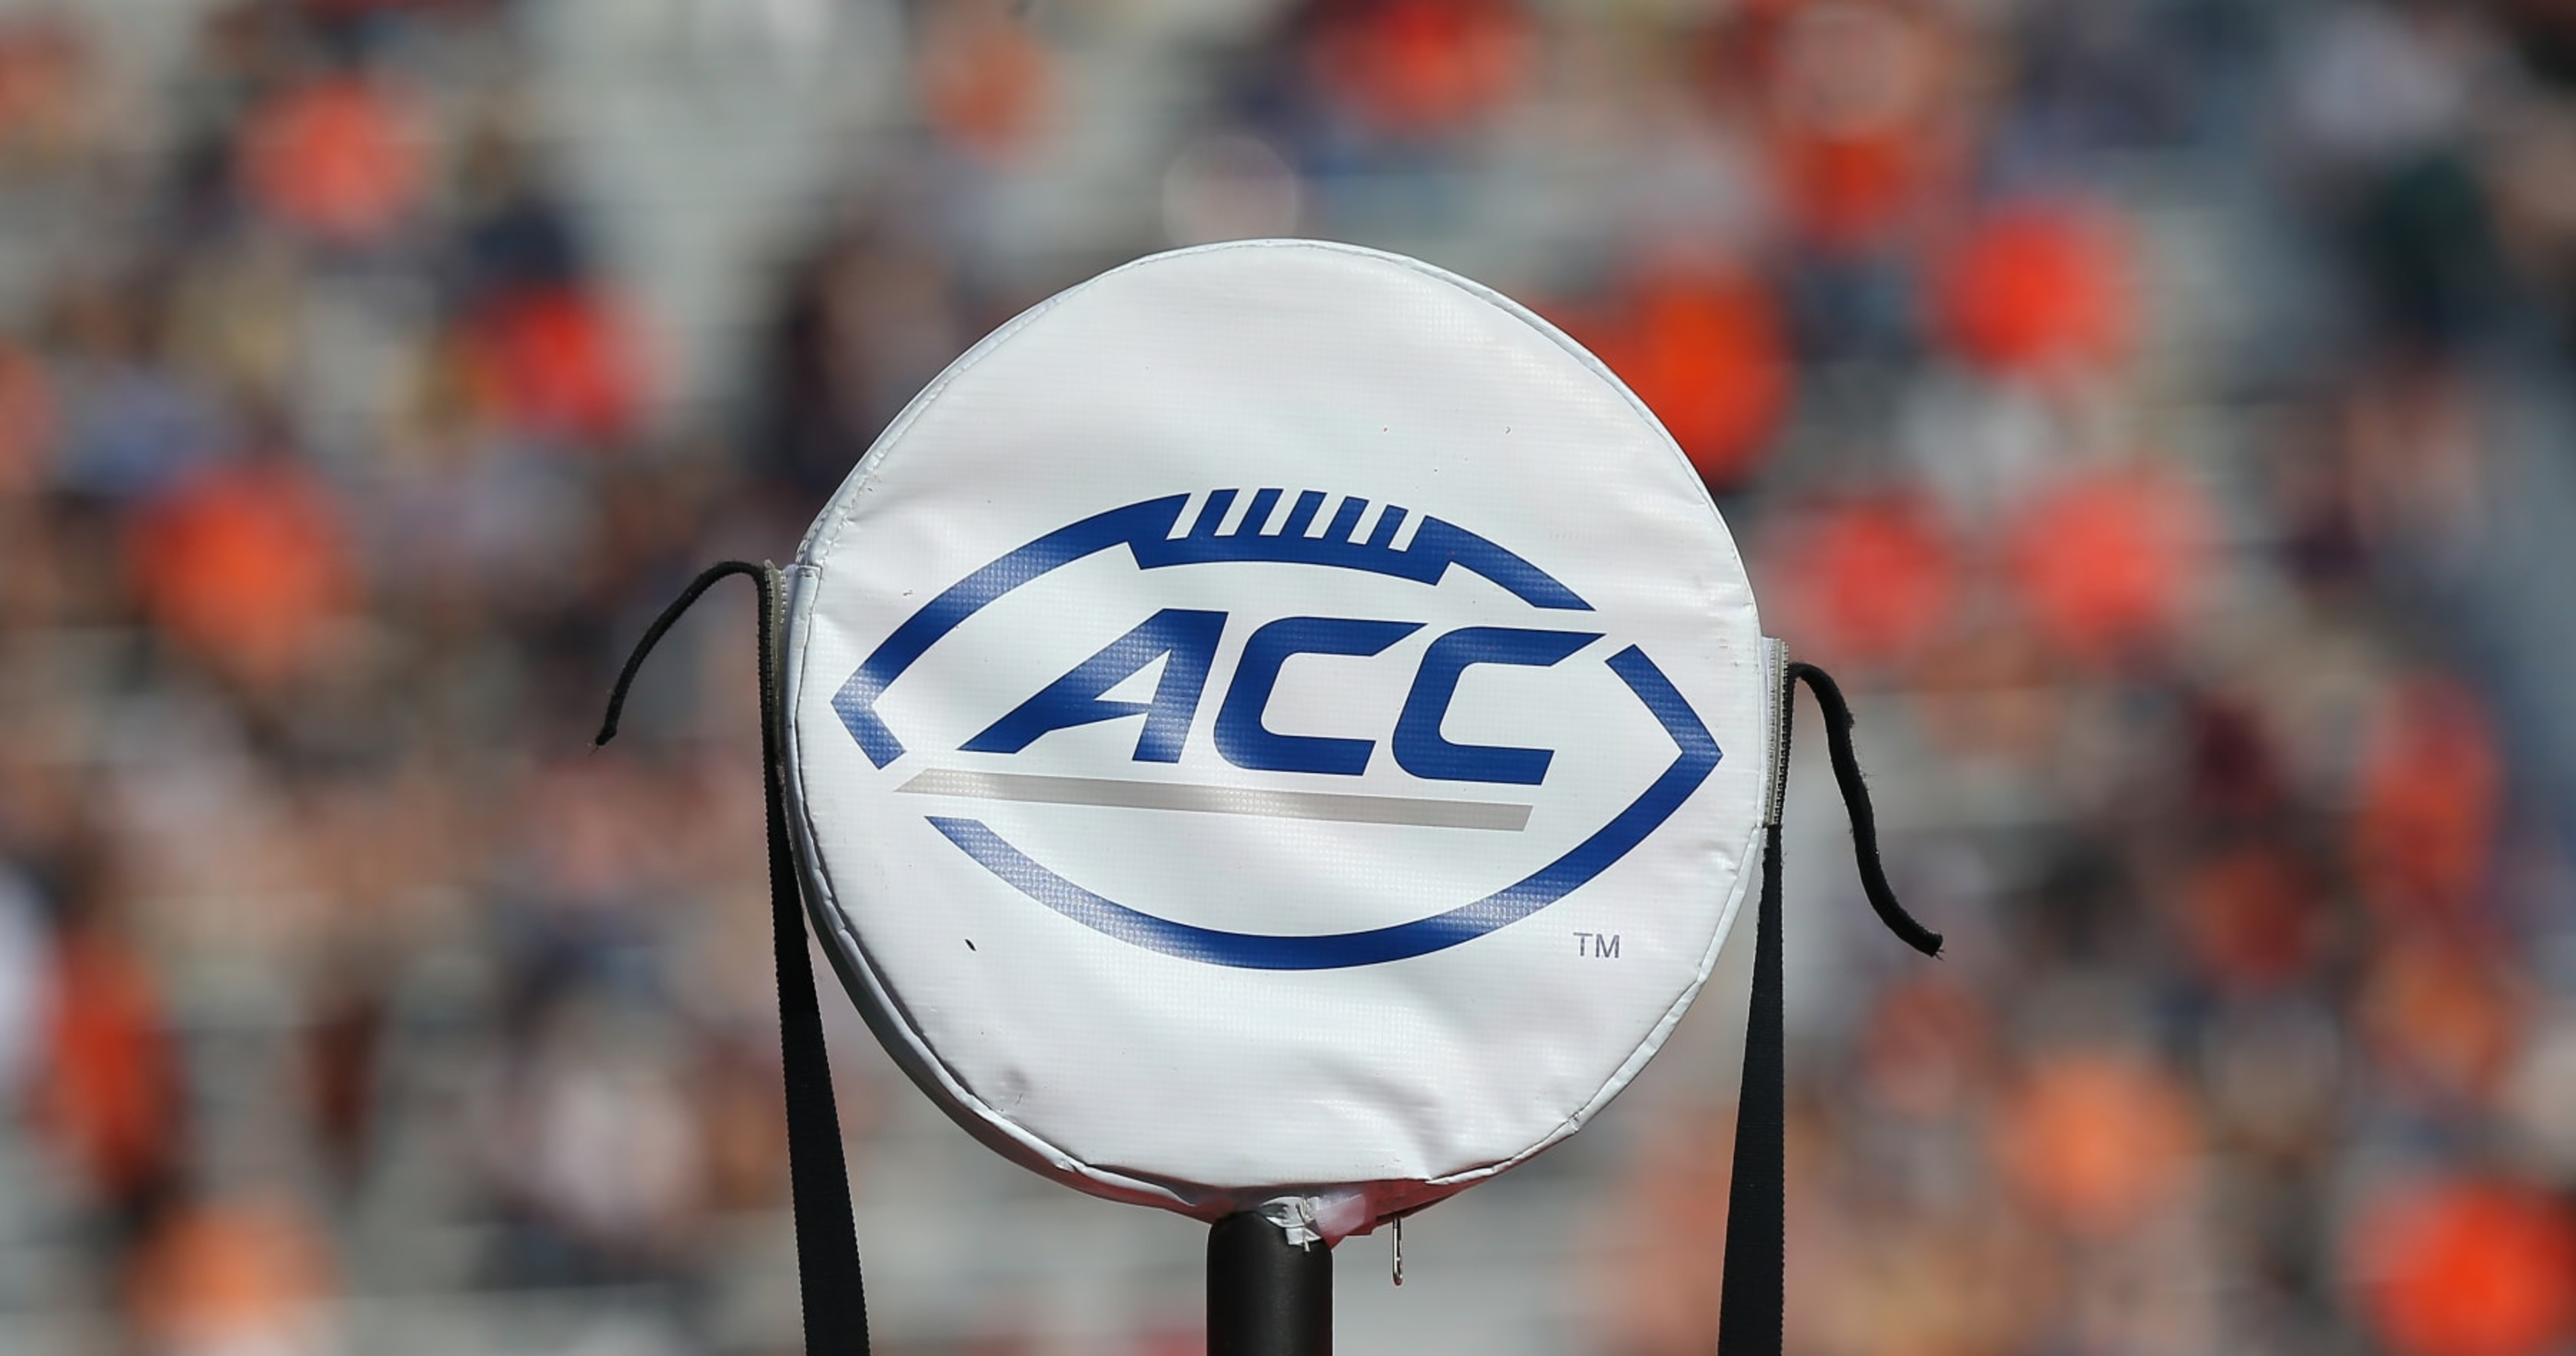 ACC Football Schedule Revealed for 202430 After Cal, Stanford, SMU